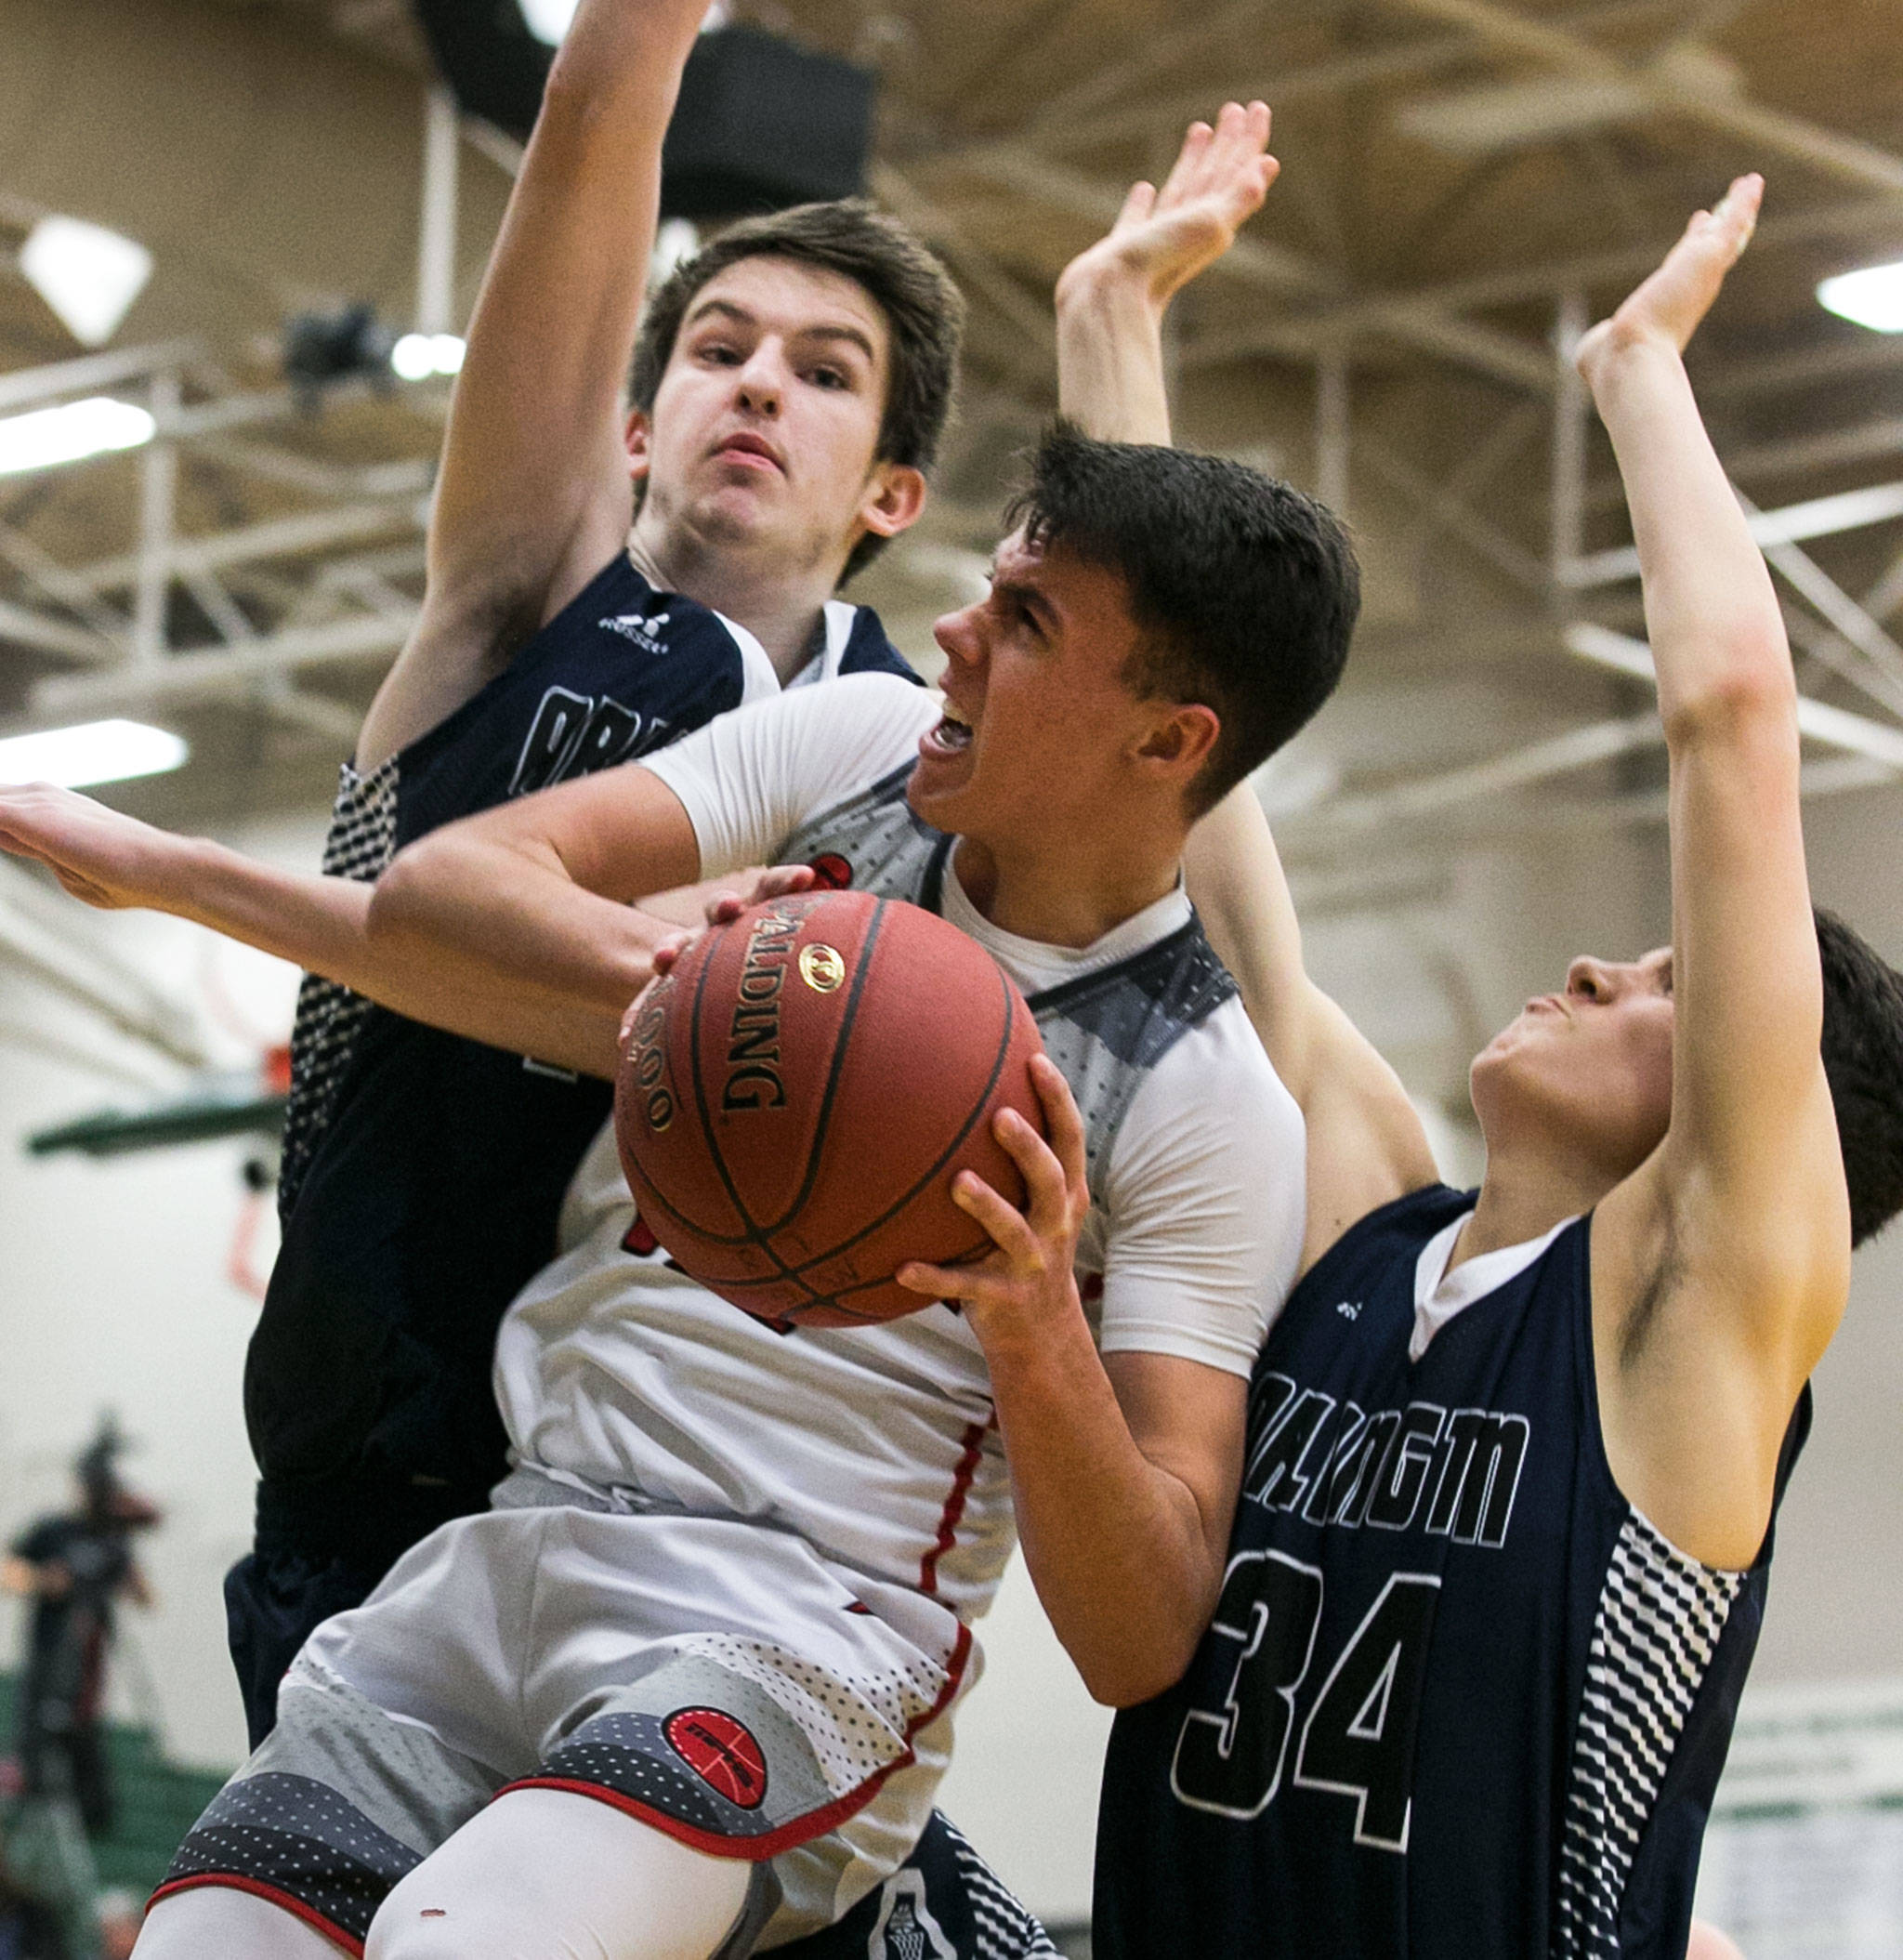 Marysville Pilchuck’s Josiah Gould attempts a shot with Arlington’s Max Smith (left) and Josh Gutierrez defending during a district playoff game on Feb. 14, 2018, at Jackson High School in Mill Creek. (Kevin Clark / The Herald)